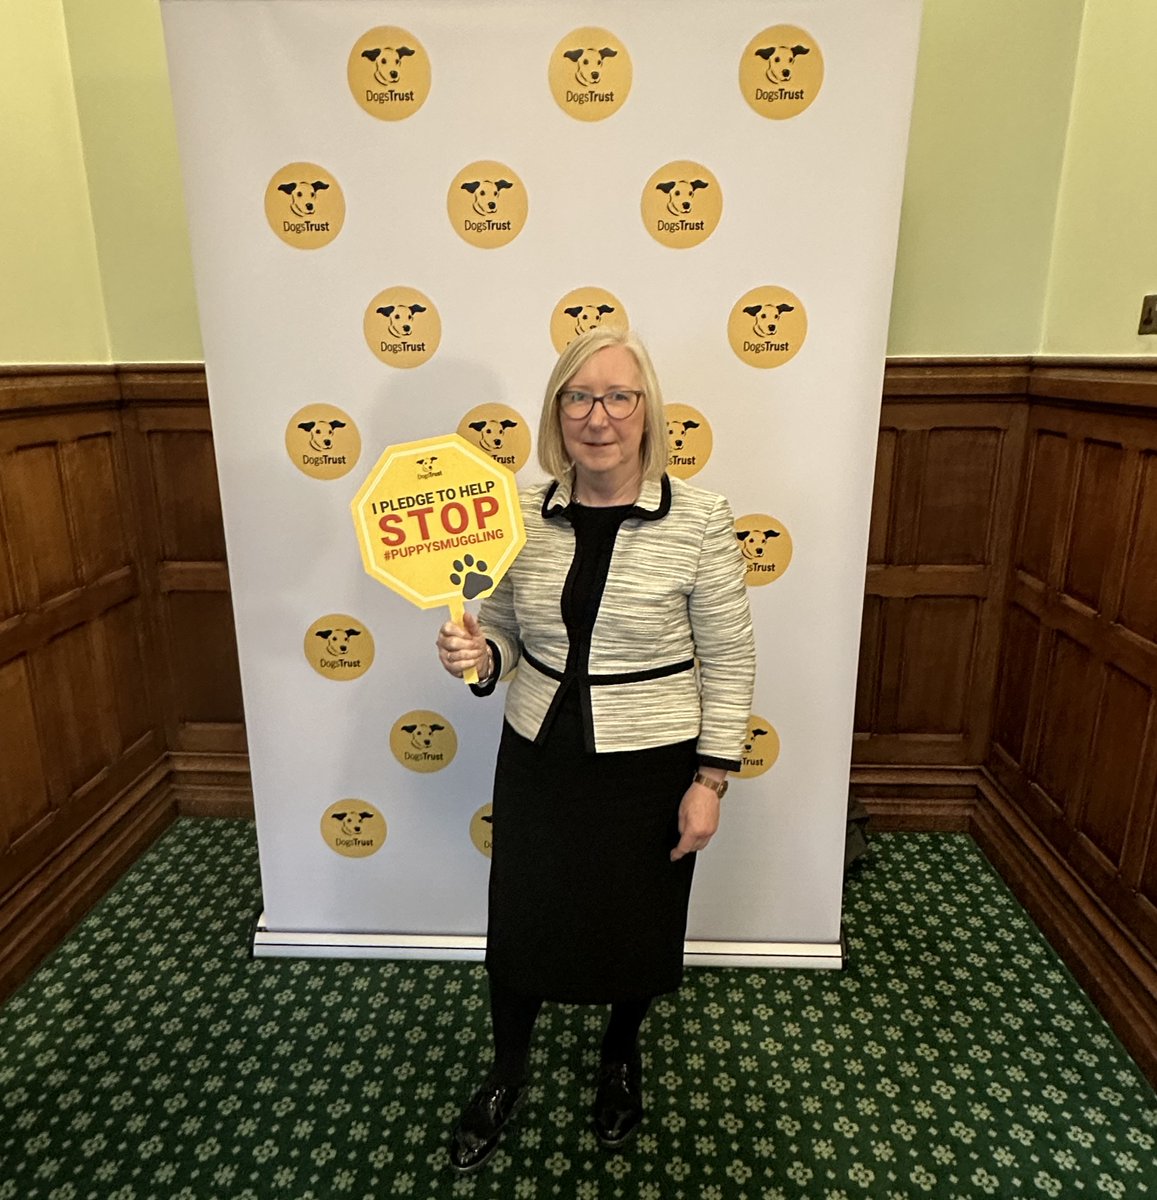 I know many #Erewash residents are concerned about the #puppysmuggling trade This week in Parliament, I was pleased to meet with representatives from @DogsTrust to discuss the importance of tackling the cruel #puppysmuggling trade